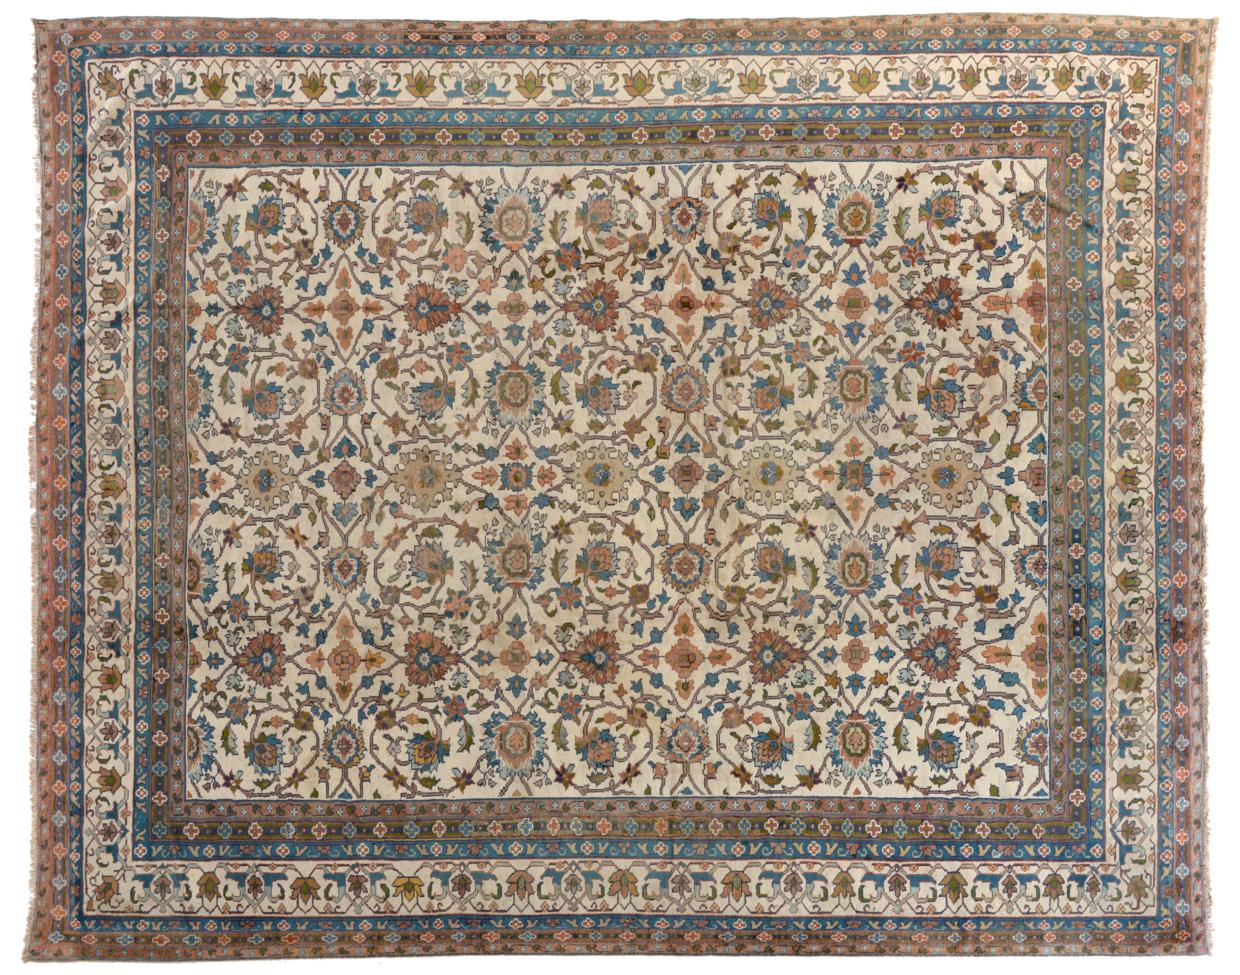 Indian Carpet of unusual size, circa 1920 The ivory field with an allover design of scrolling